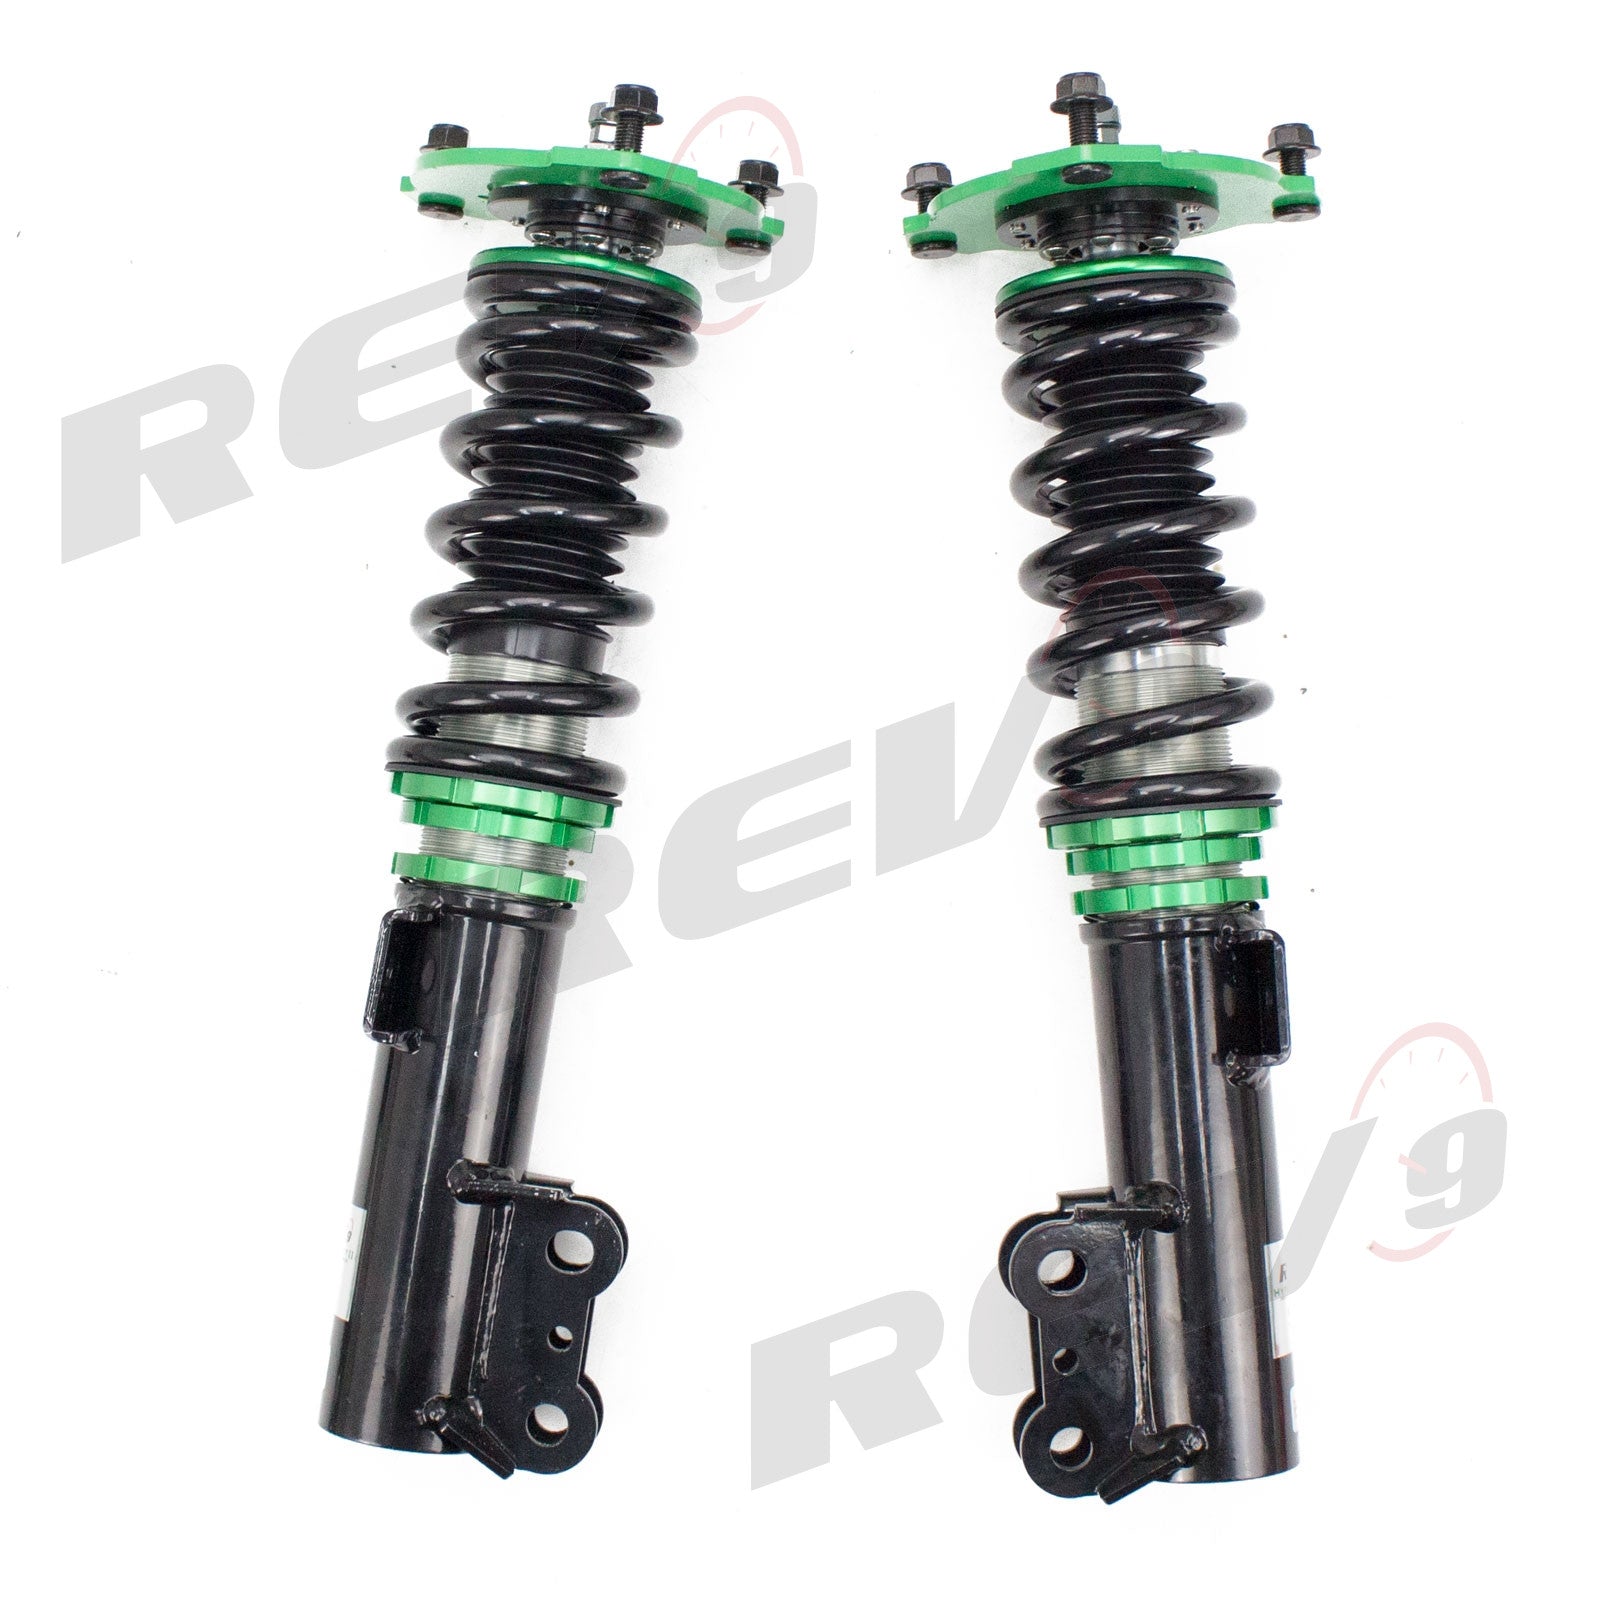 Rev9 Compatible With Kia Forte Koup(YD) 2014-16 (w/o Torsion Beam) Hyper-Street II Coilover Kit w/ 32-Way Damping Force Adjustment